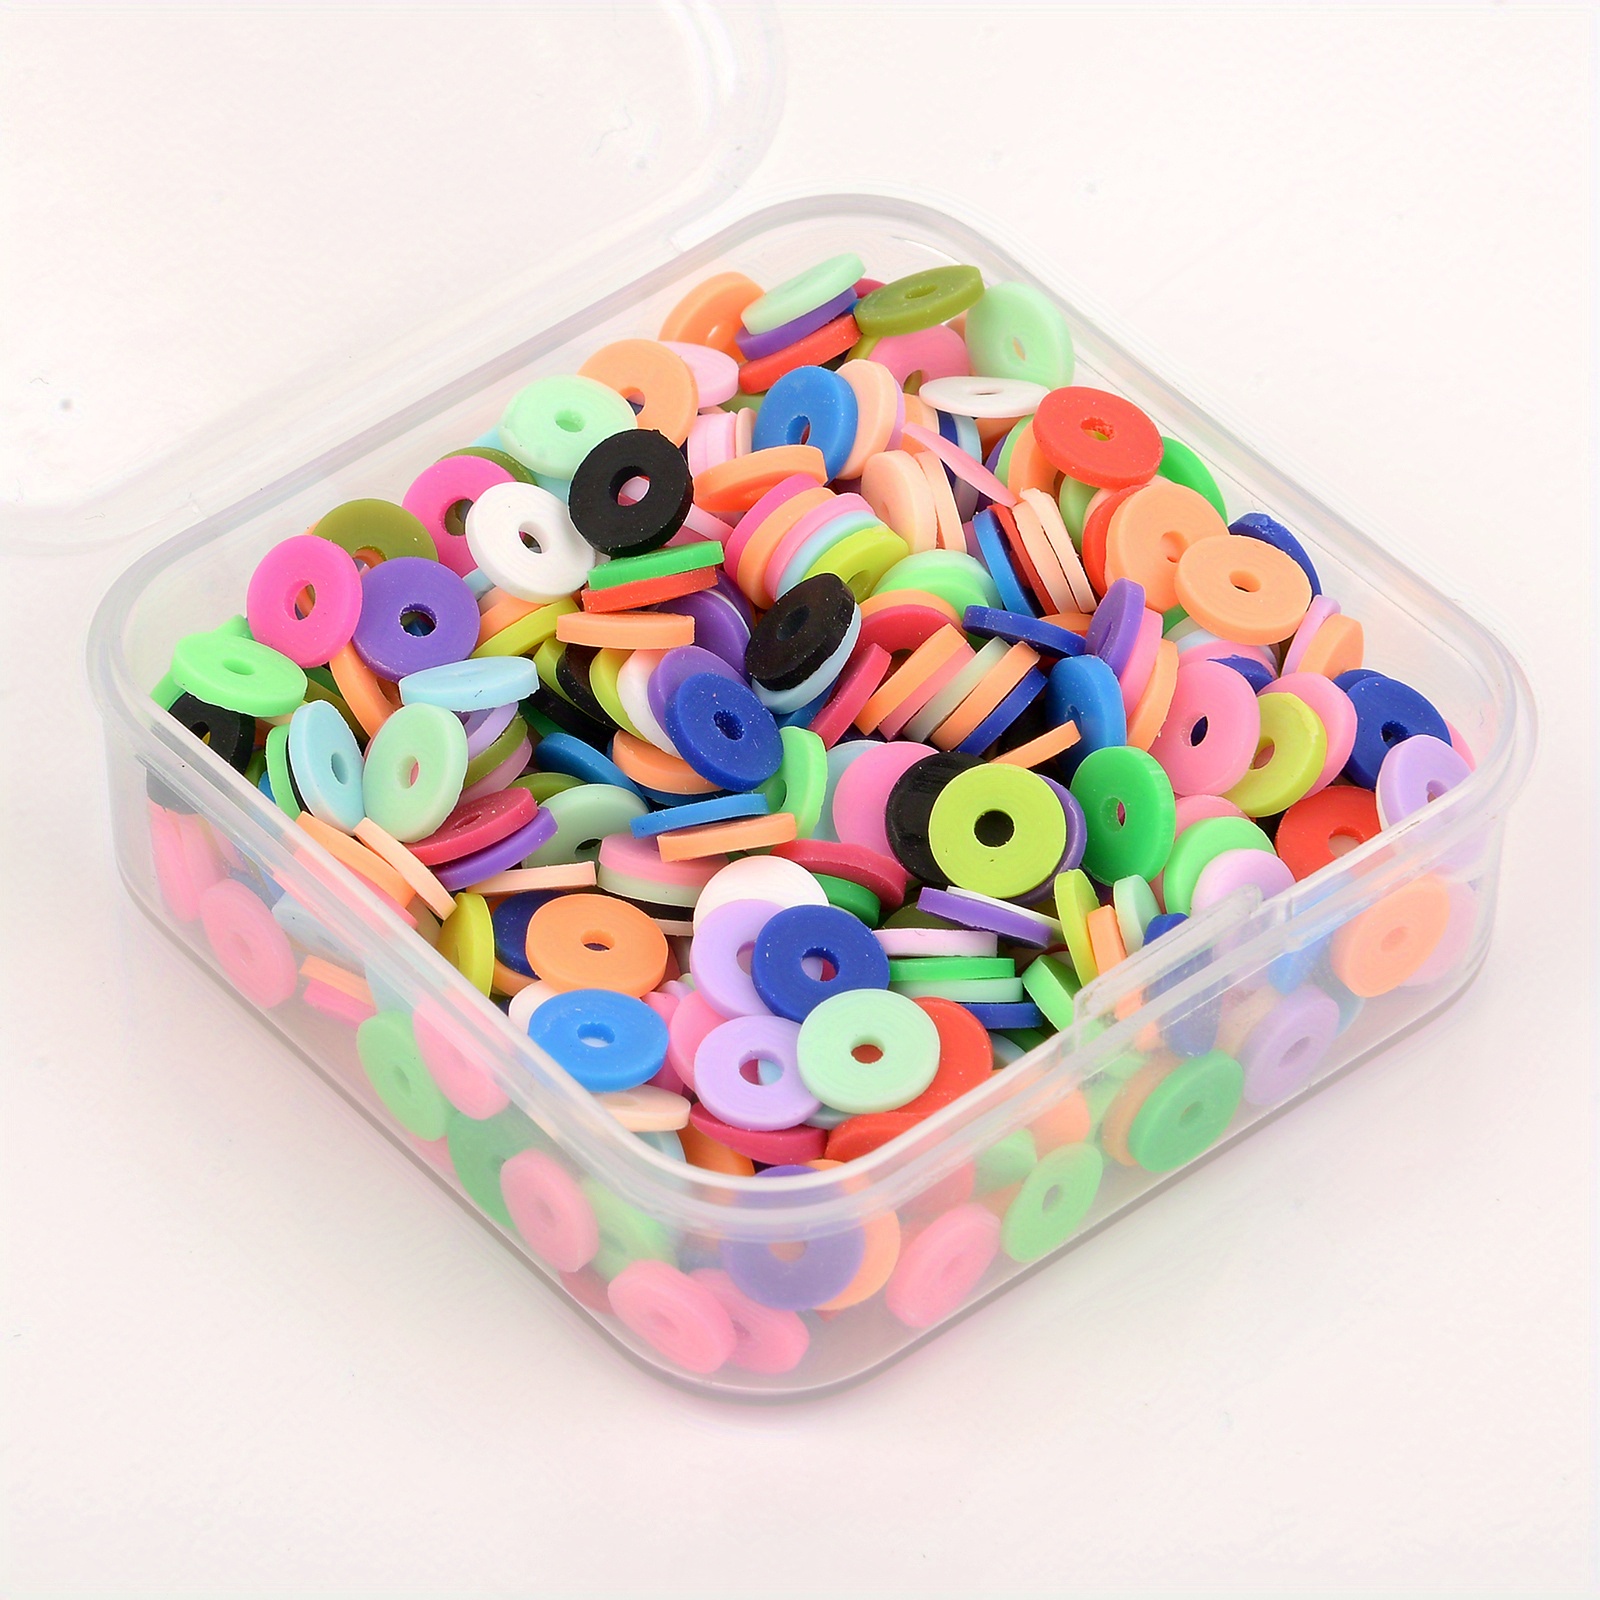 VILLCASE 1 Box Soft Pottery Set Spacer Beads Kit Small Beads DIY Craft  Charms Polymer Clay Slice Flat Disc Bead Clay Beads Tiny Beads for Jewelry